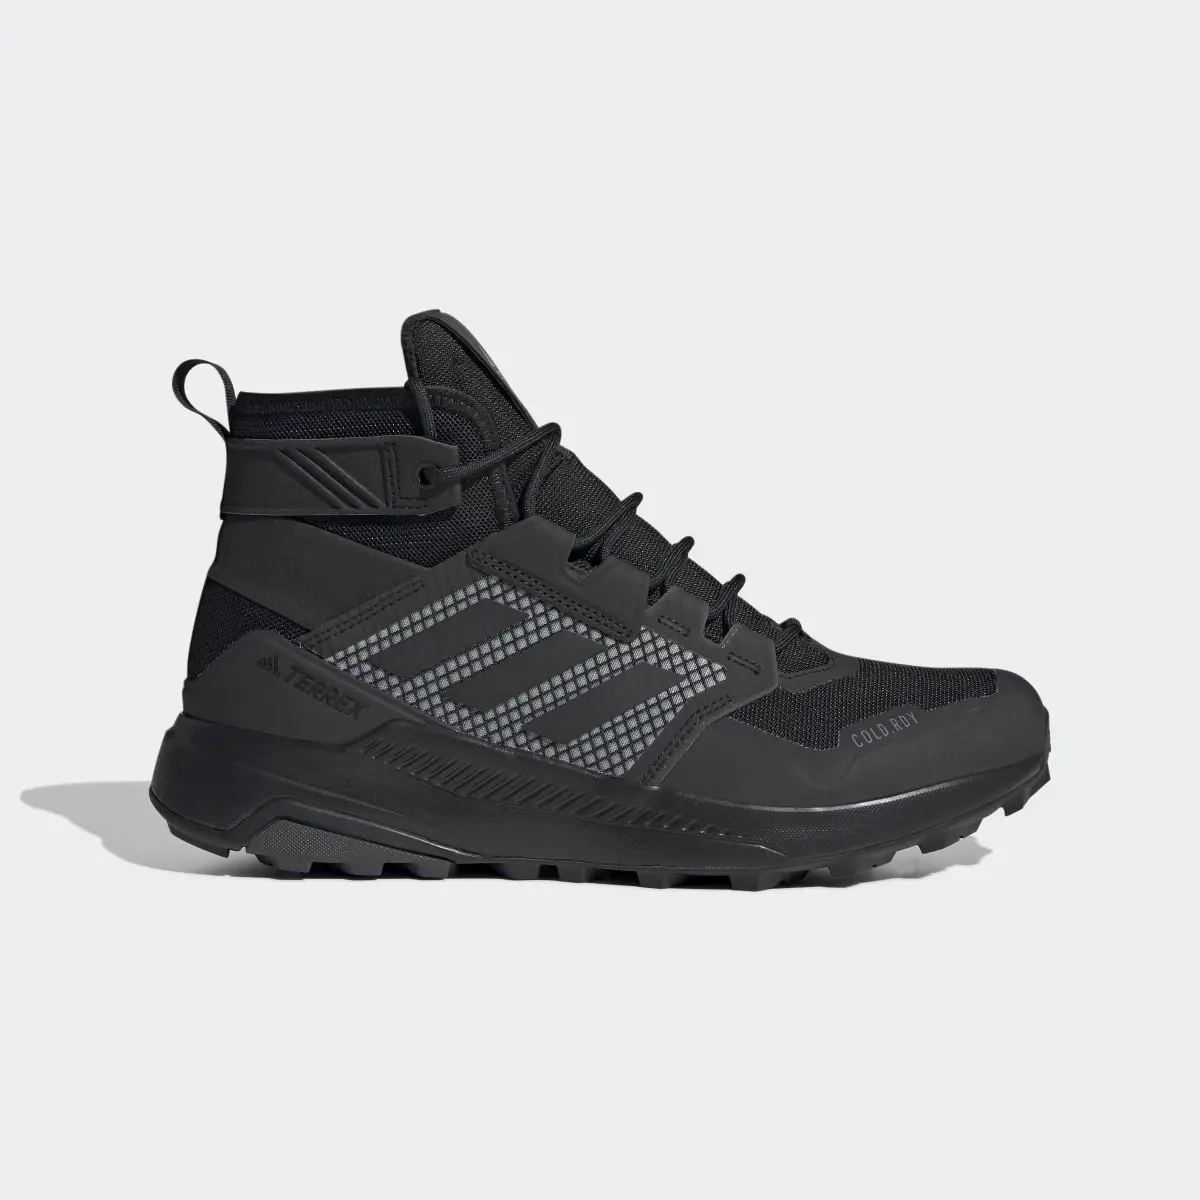 Adidas Terrex Trailmaker Mid COLD.RDY Hiking Shoes. 2